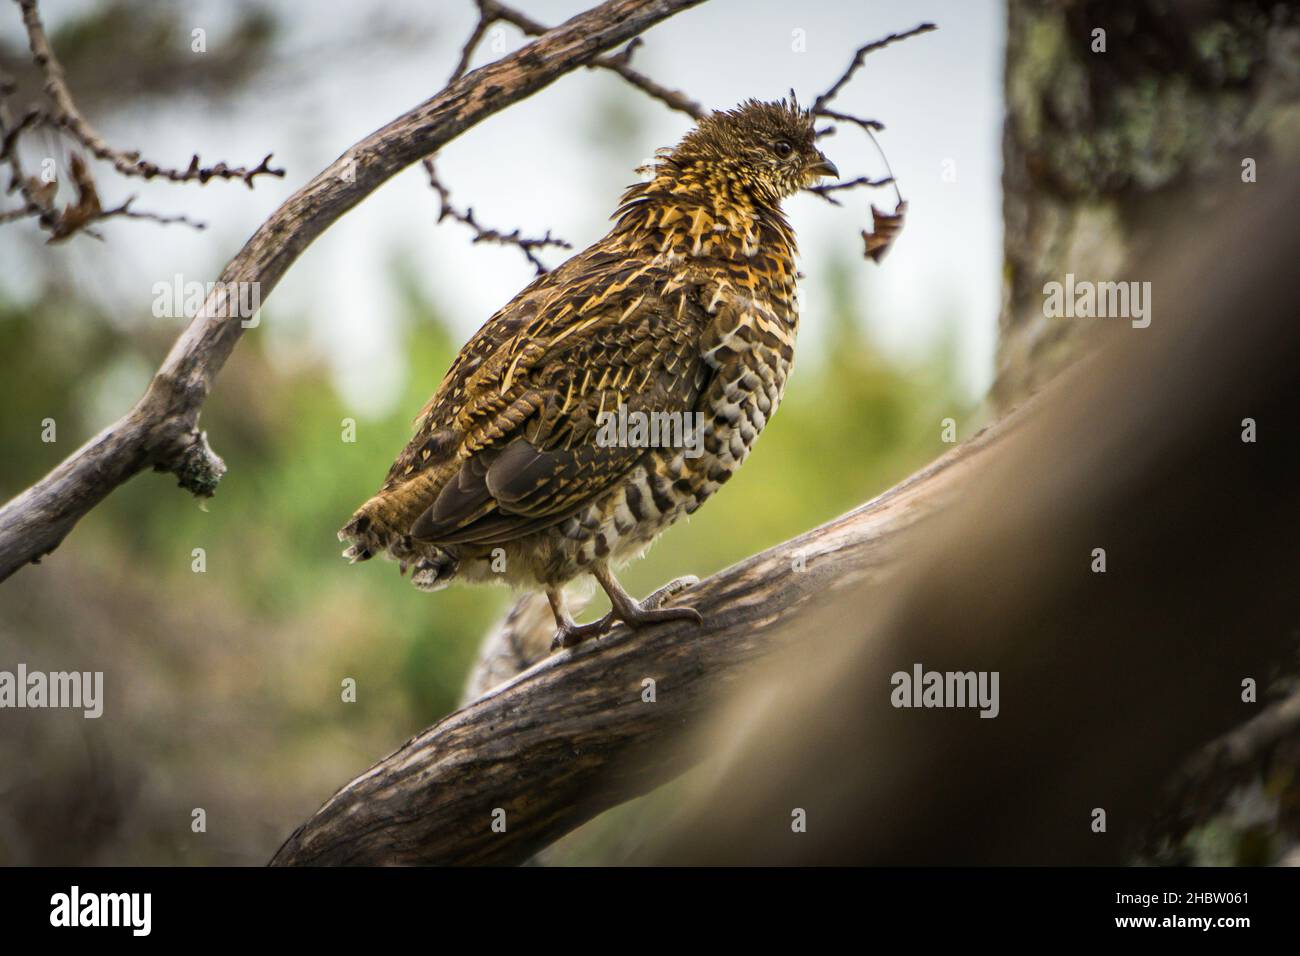 Ruffed grouse in the forest of Anticosti Island, an island located in the St Lawrence estuary in Cote Nord region of Quebec, Canada Stock Photo